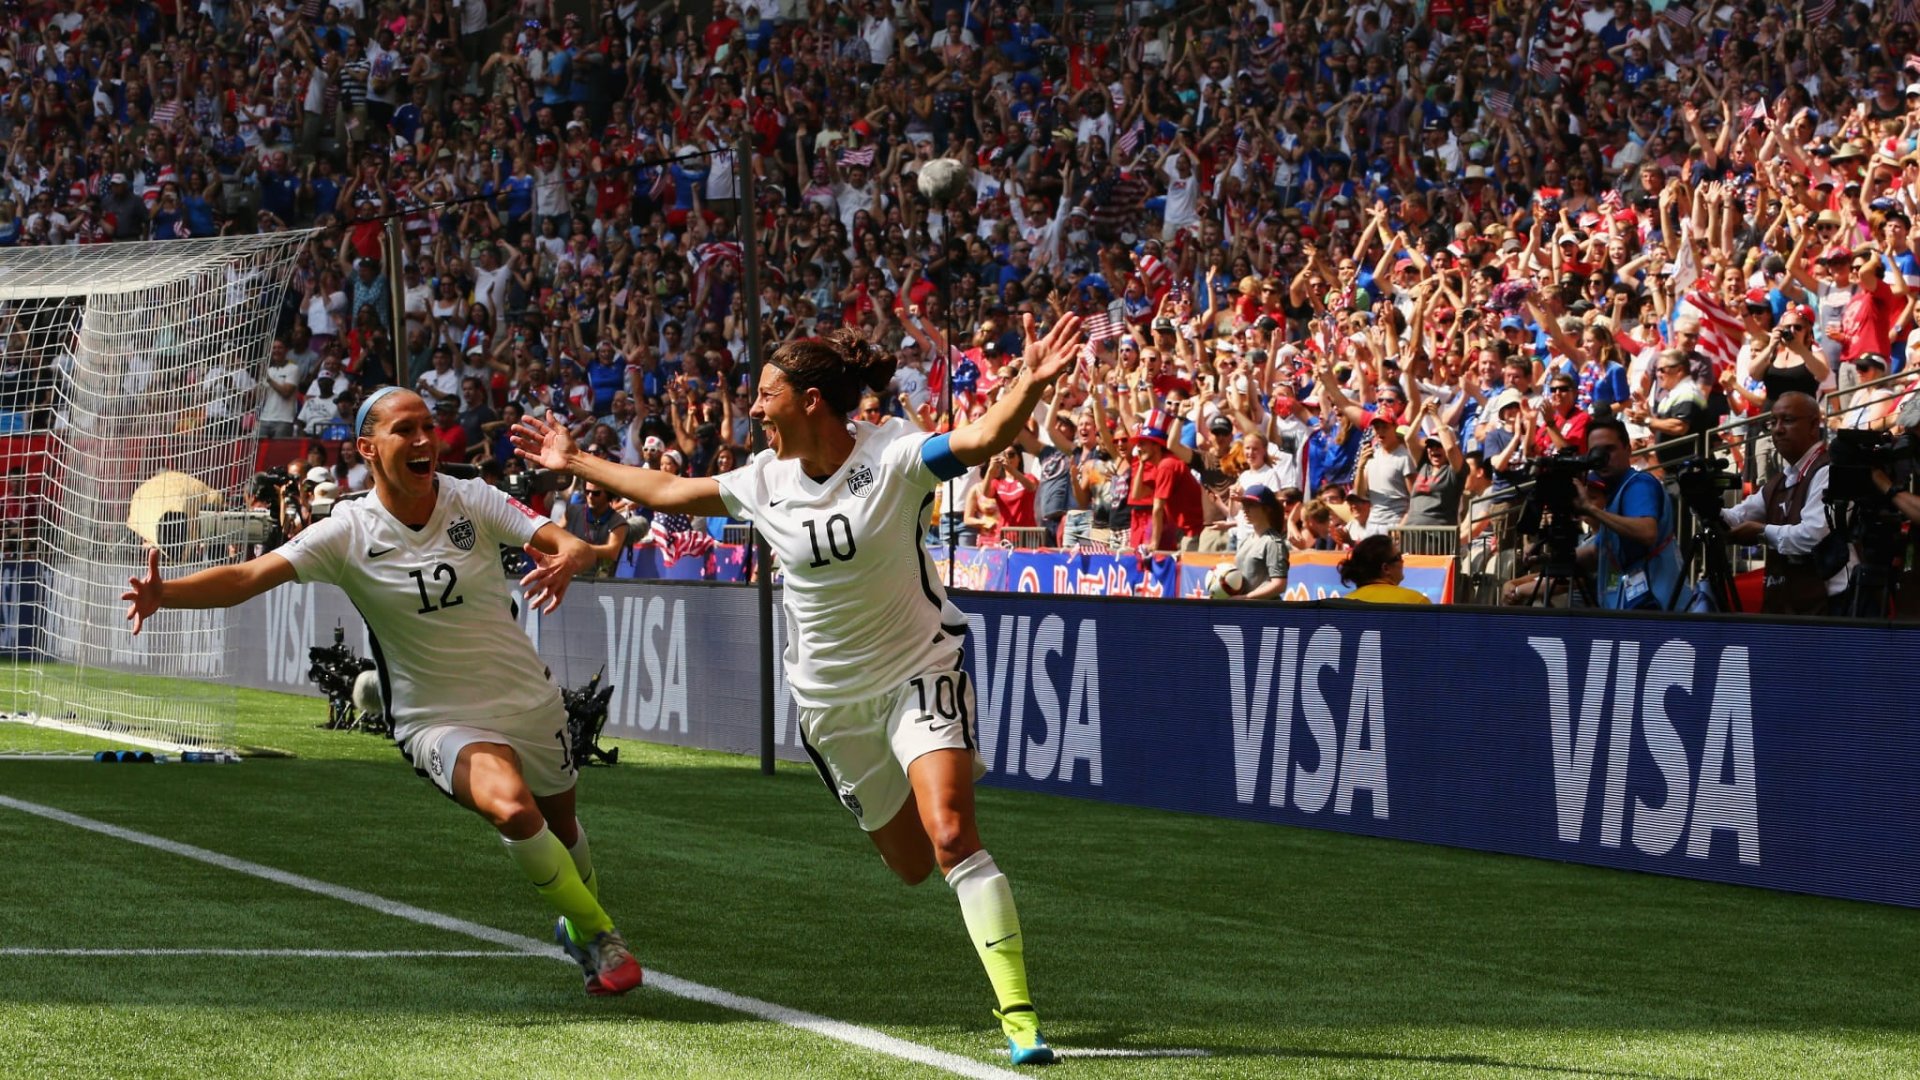 Carli Lloyd celebrating scoring a hat trick for USA against Japan in the 2015 Women's World Cup